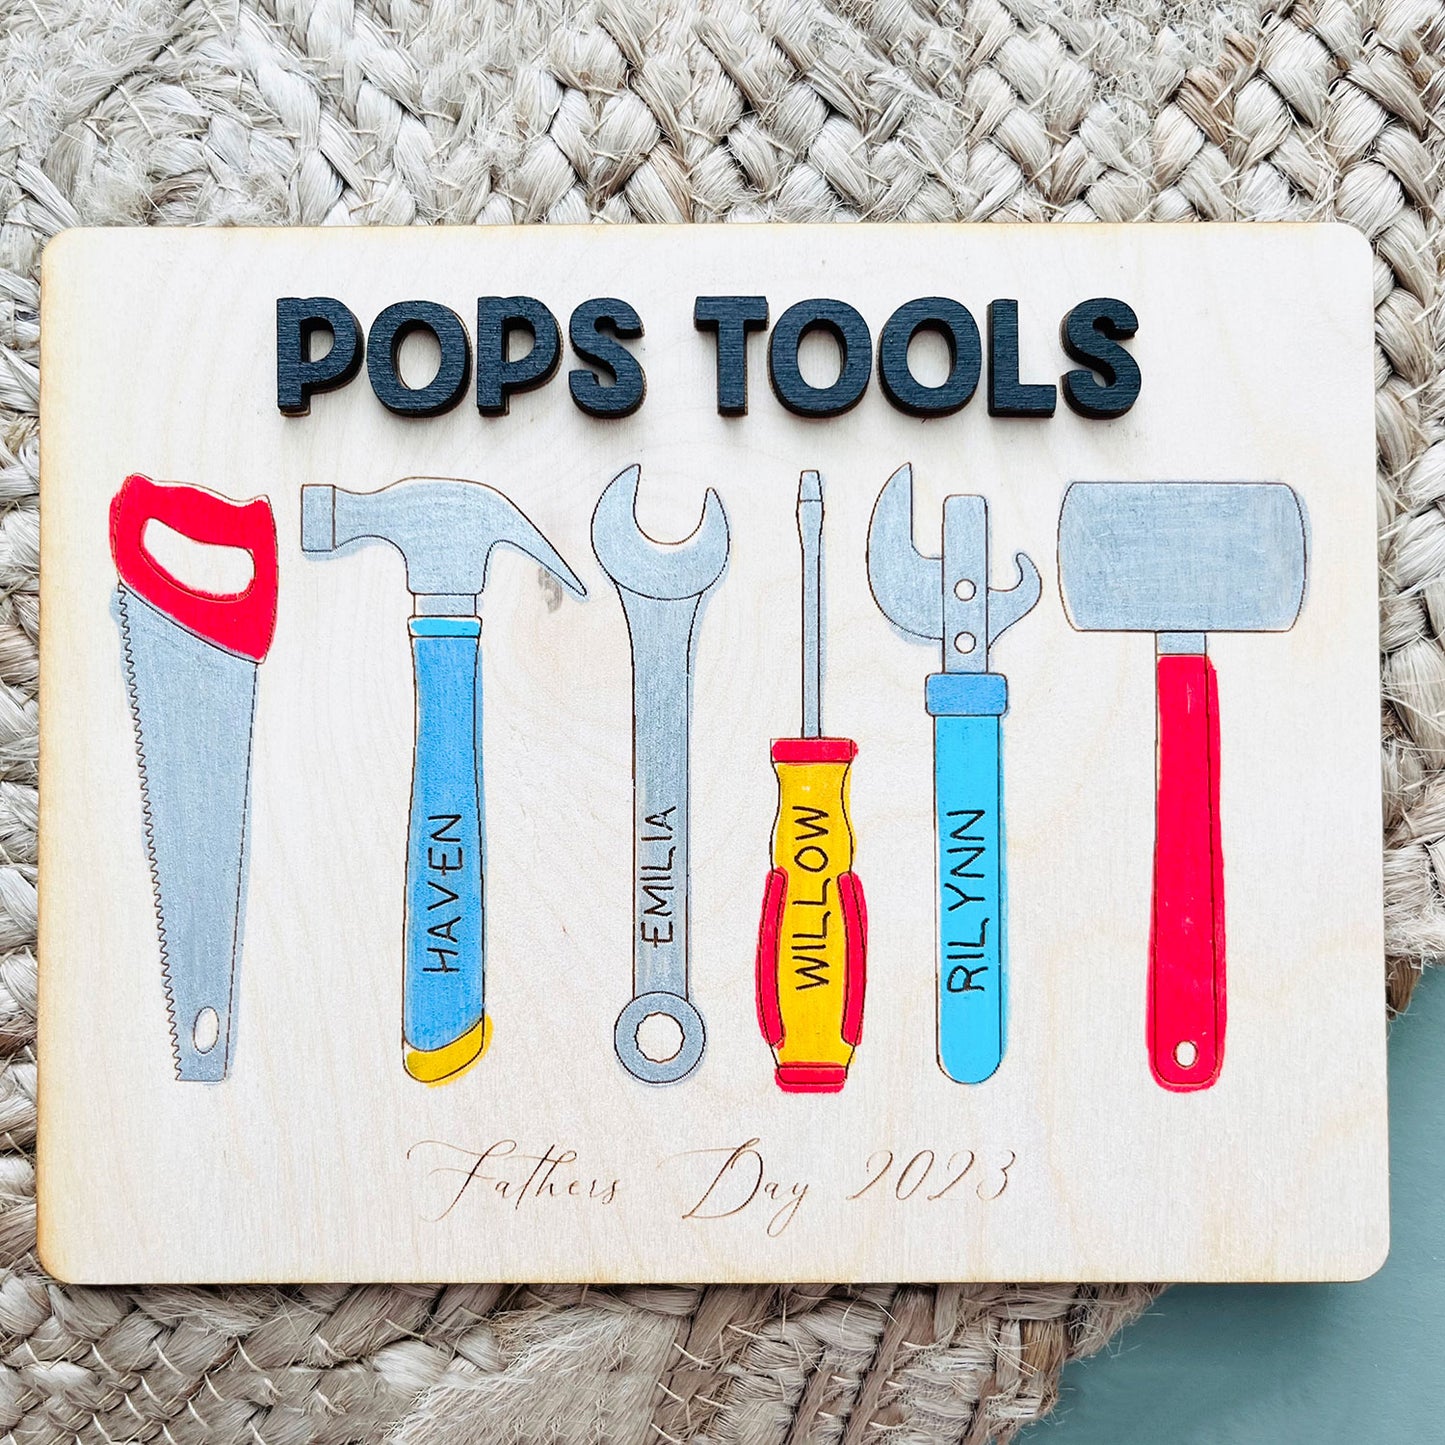 Personalizable Father's Day Tool Plaque - Father's Day Sign